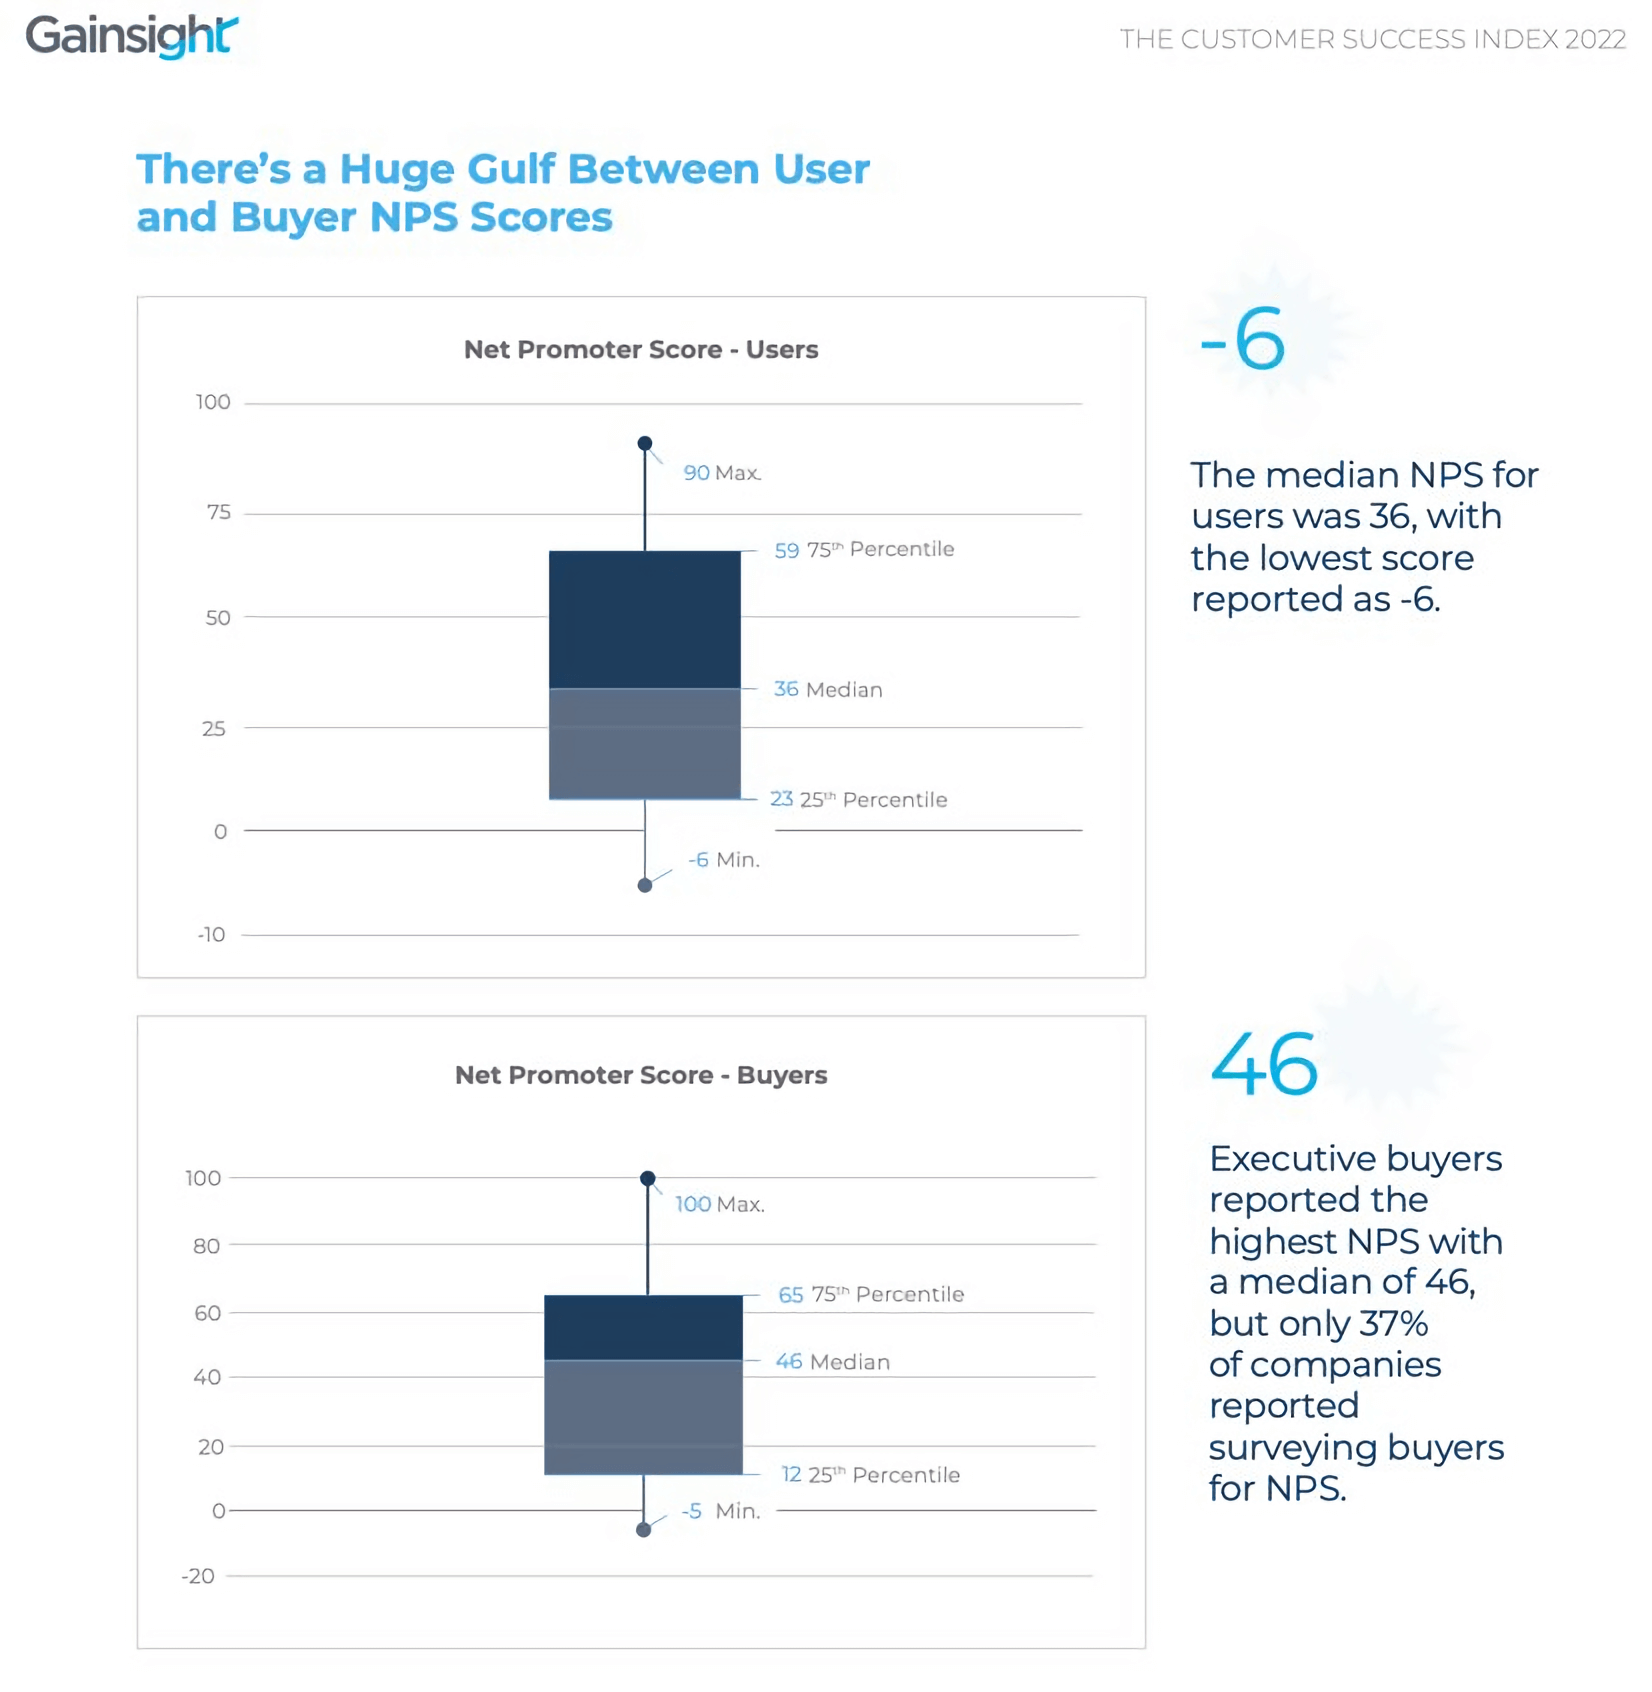 Difference between user and buyer NPS scores